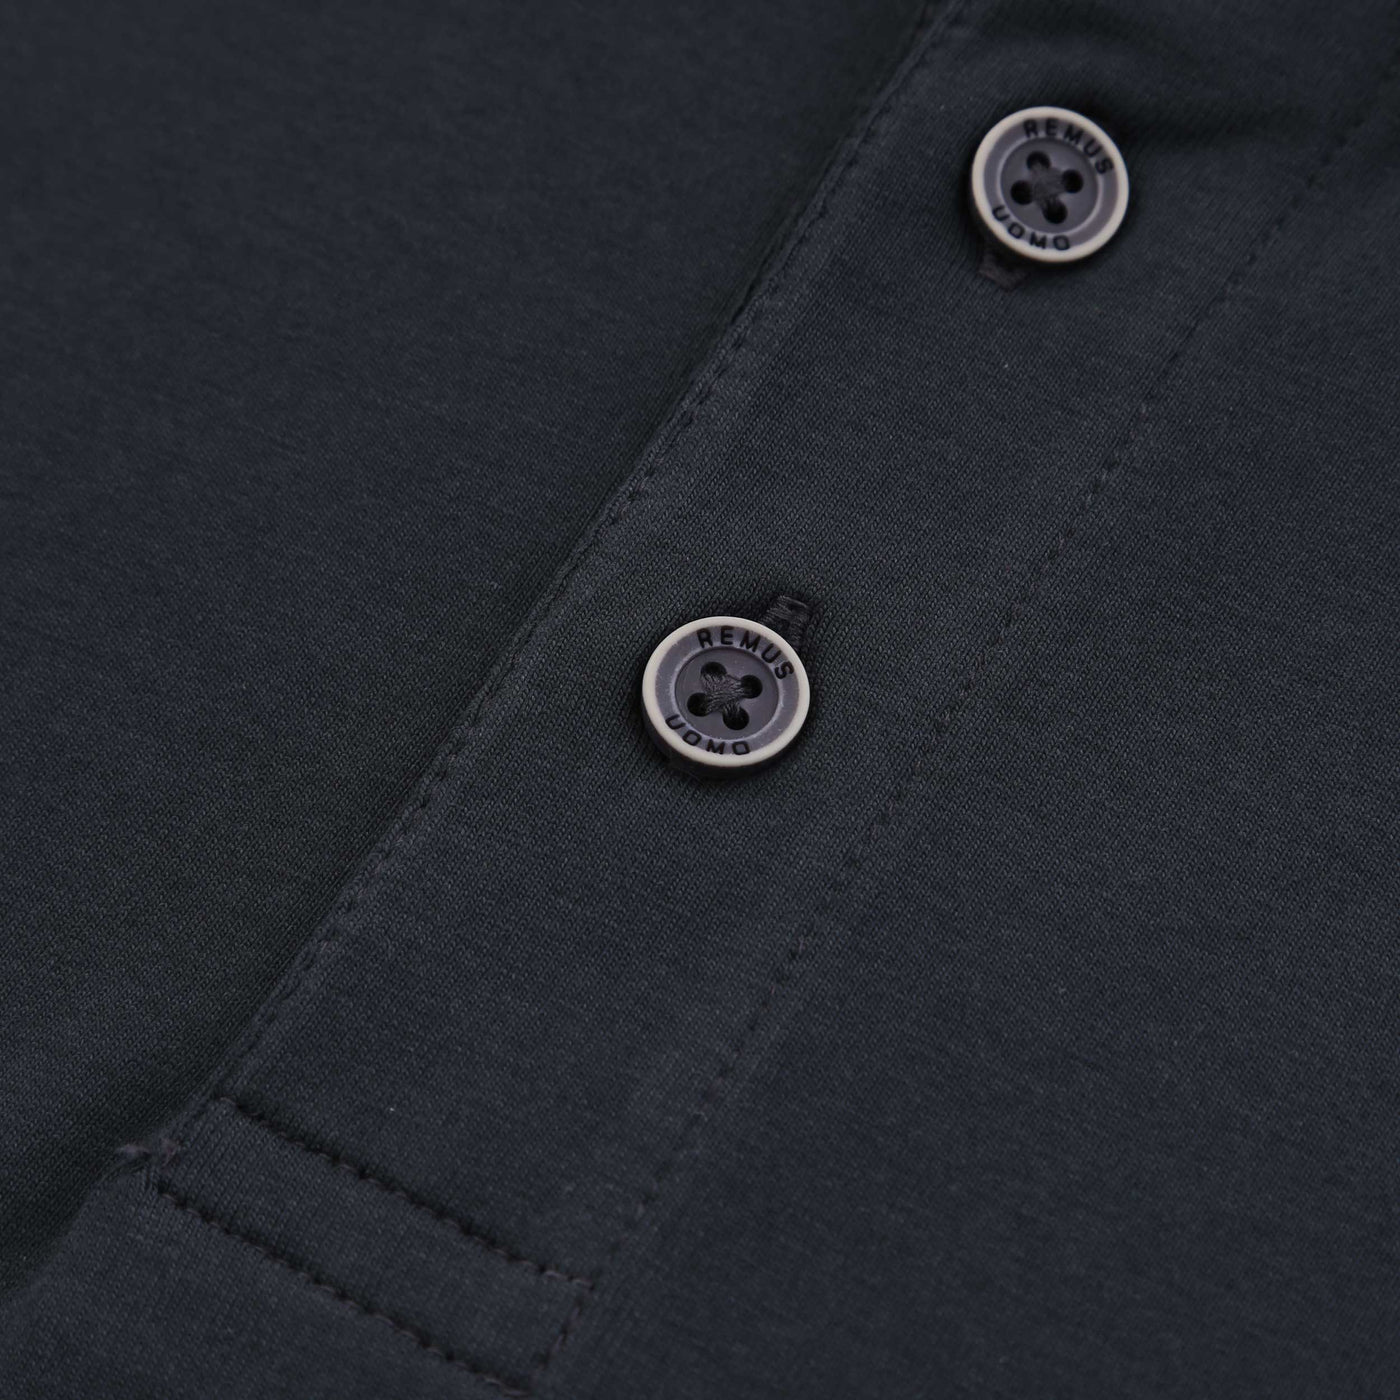 Remus Uomo Plain LS Polo Shirt in Charcoal Buttons